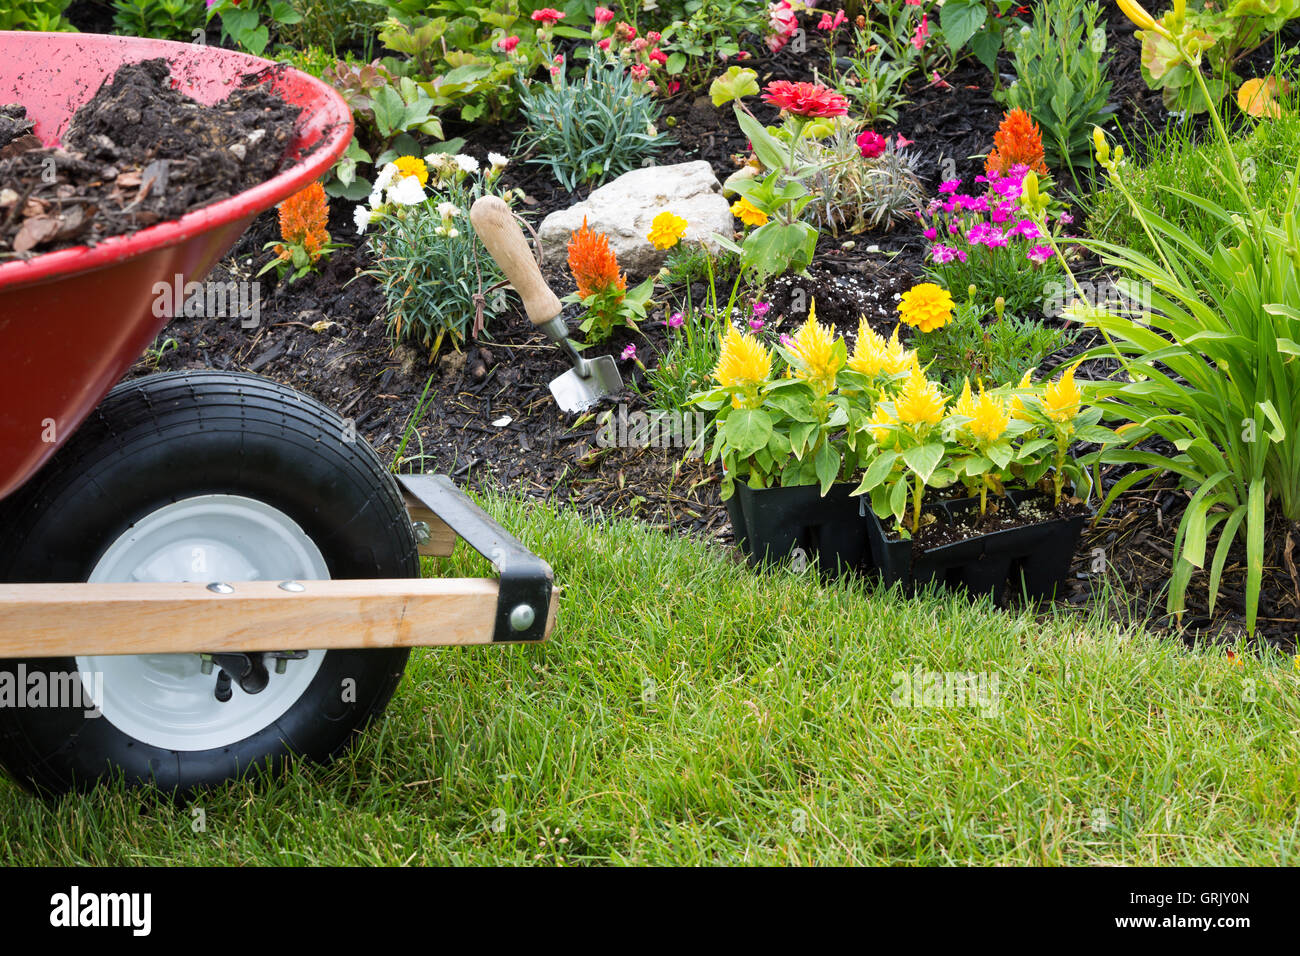 Wheelbarrow alongside a newly planted flowerbed with colorful yellow celosia seedlings in plastic packets waiting to be transpla Stock Photo